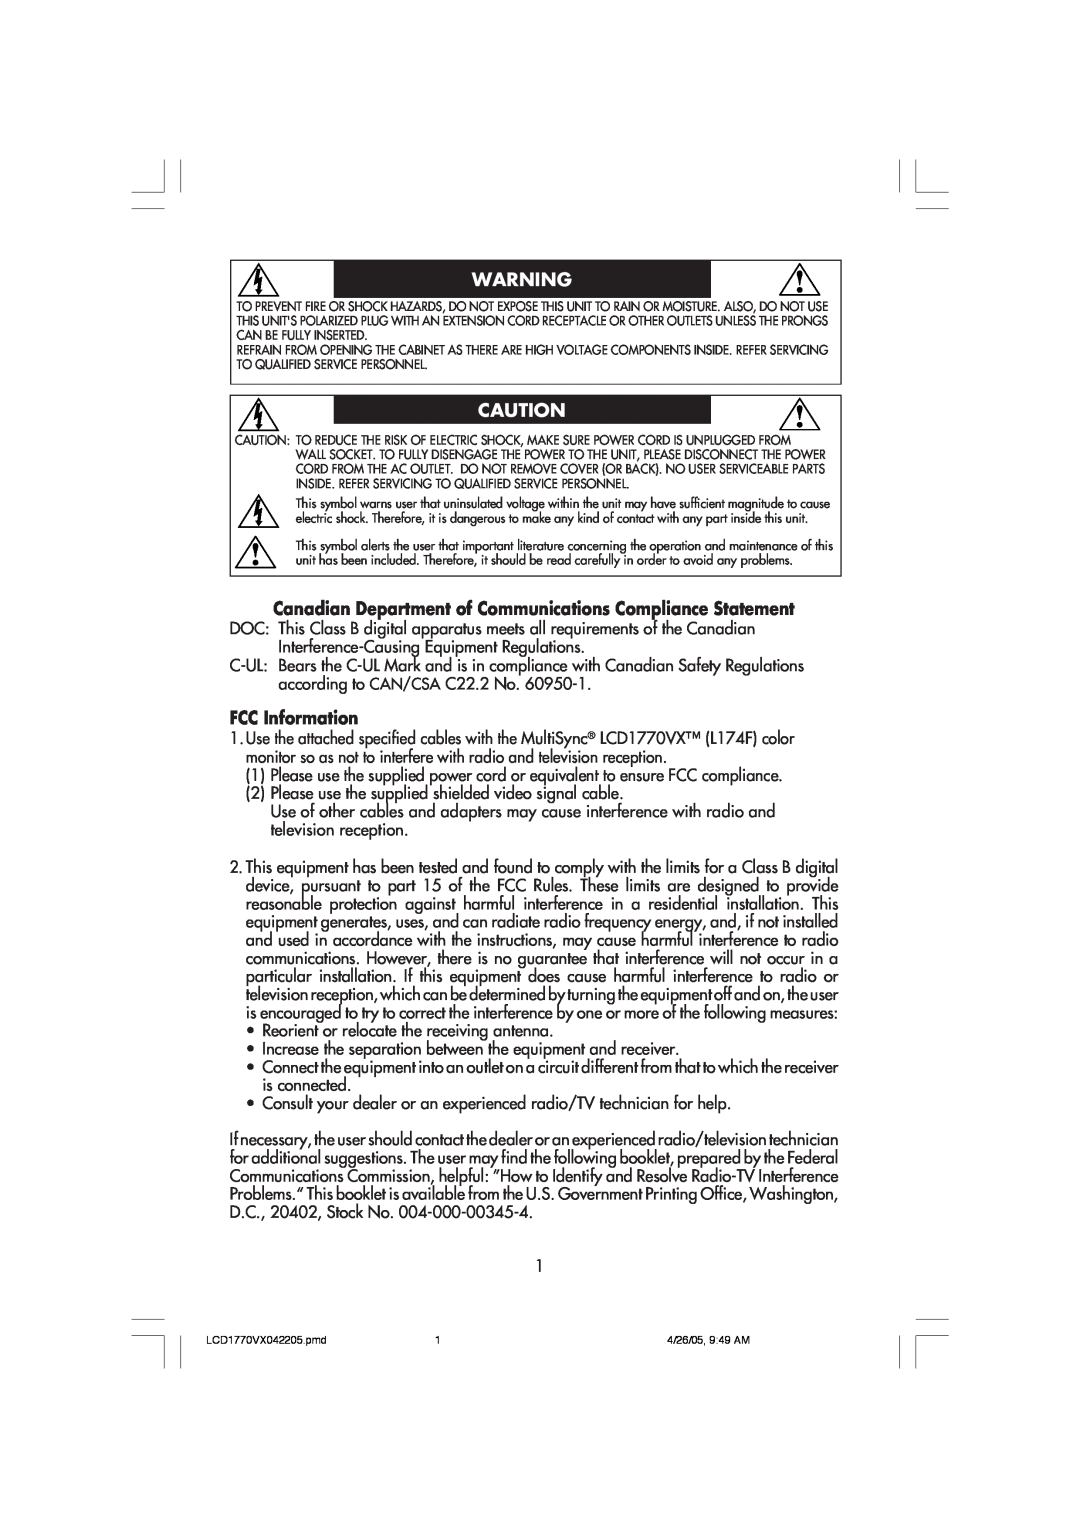 NEC LCD1770VX user manual Canadian Department of Communications Compliance Statement, FCC Information 